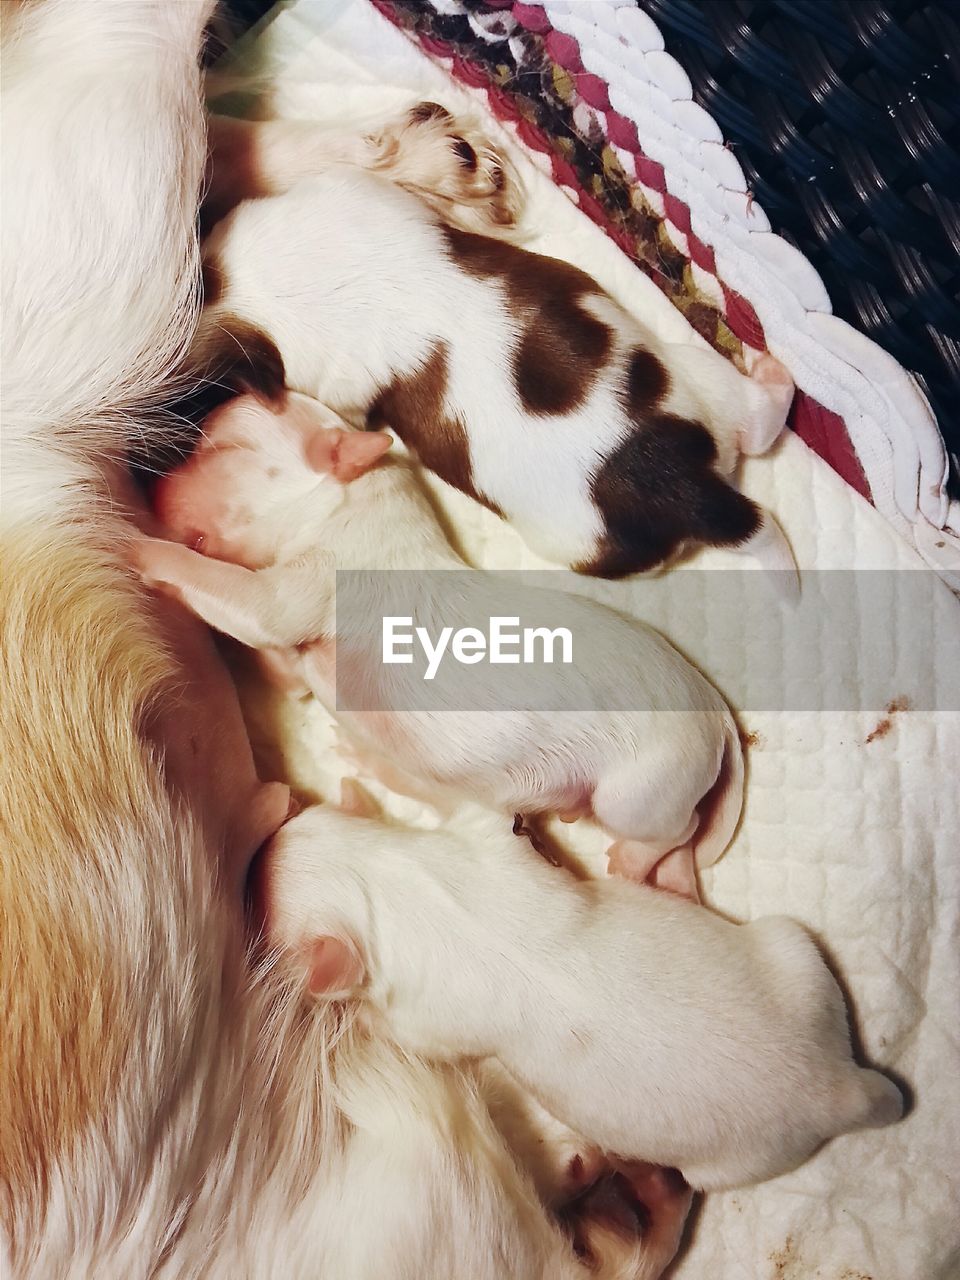 Midsection of female dog feeding puppies on pet bed